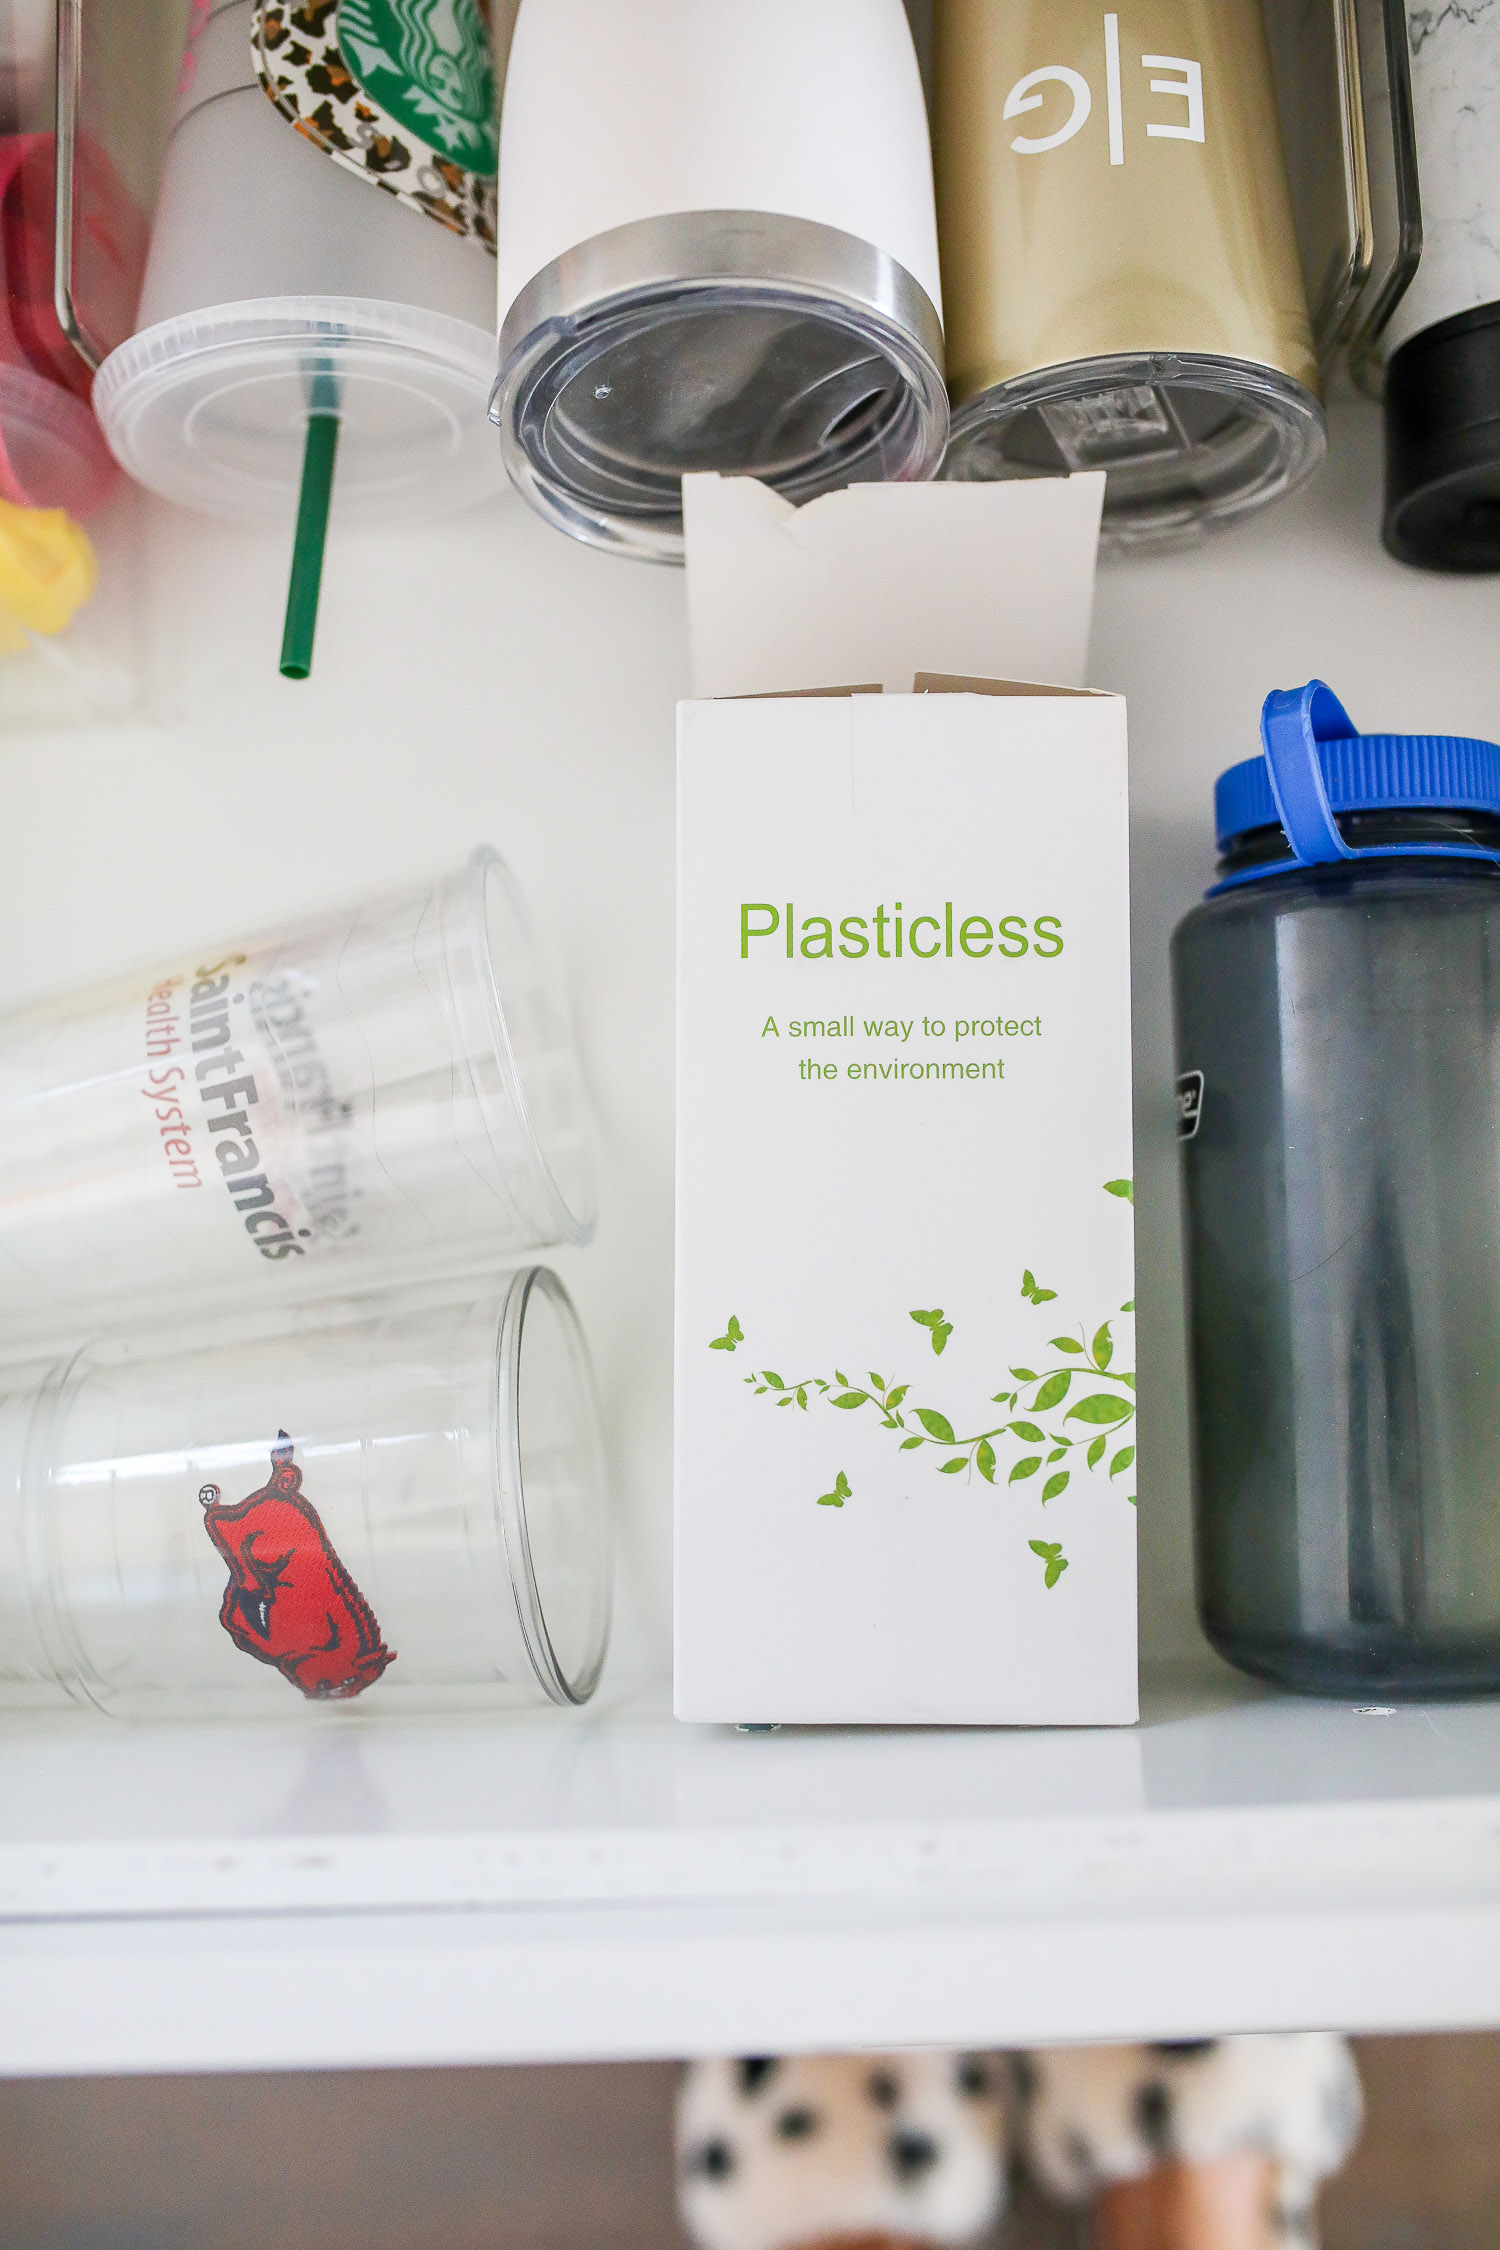 plasticless straws amazon, top amazon must haves, amazon best buys 2020, emily gemma, amazon prime must haves blog post,_-4 | Amazon Prime Favorites by popular US life and style blog, The Sweetest Thing: image of Amazon Prime Plasticless biodegradable straws. 